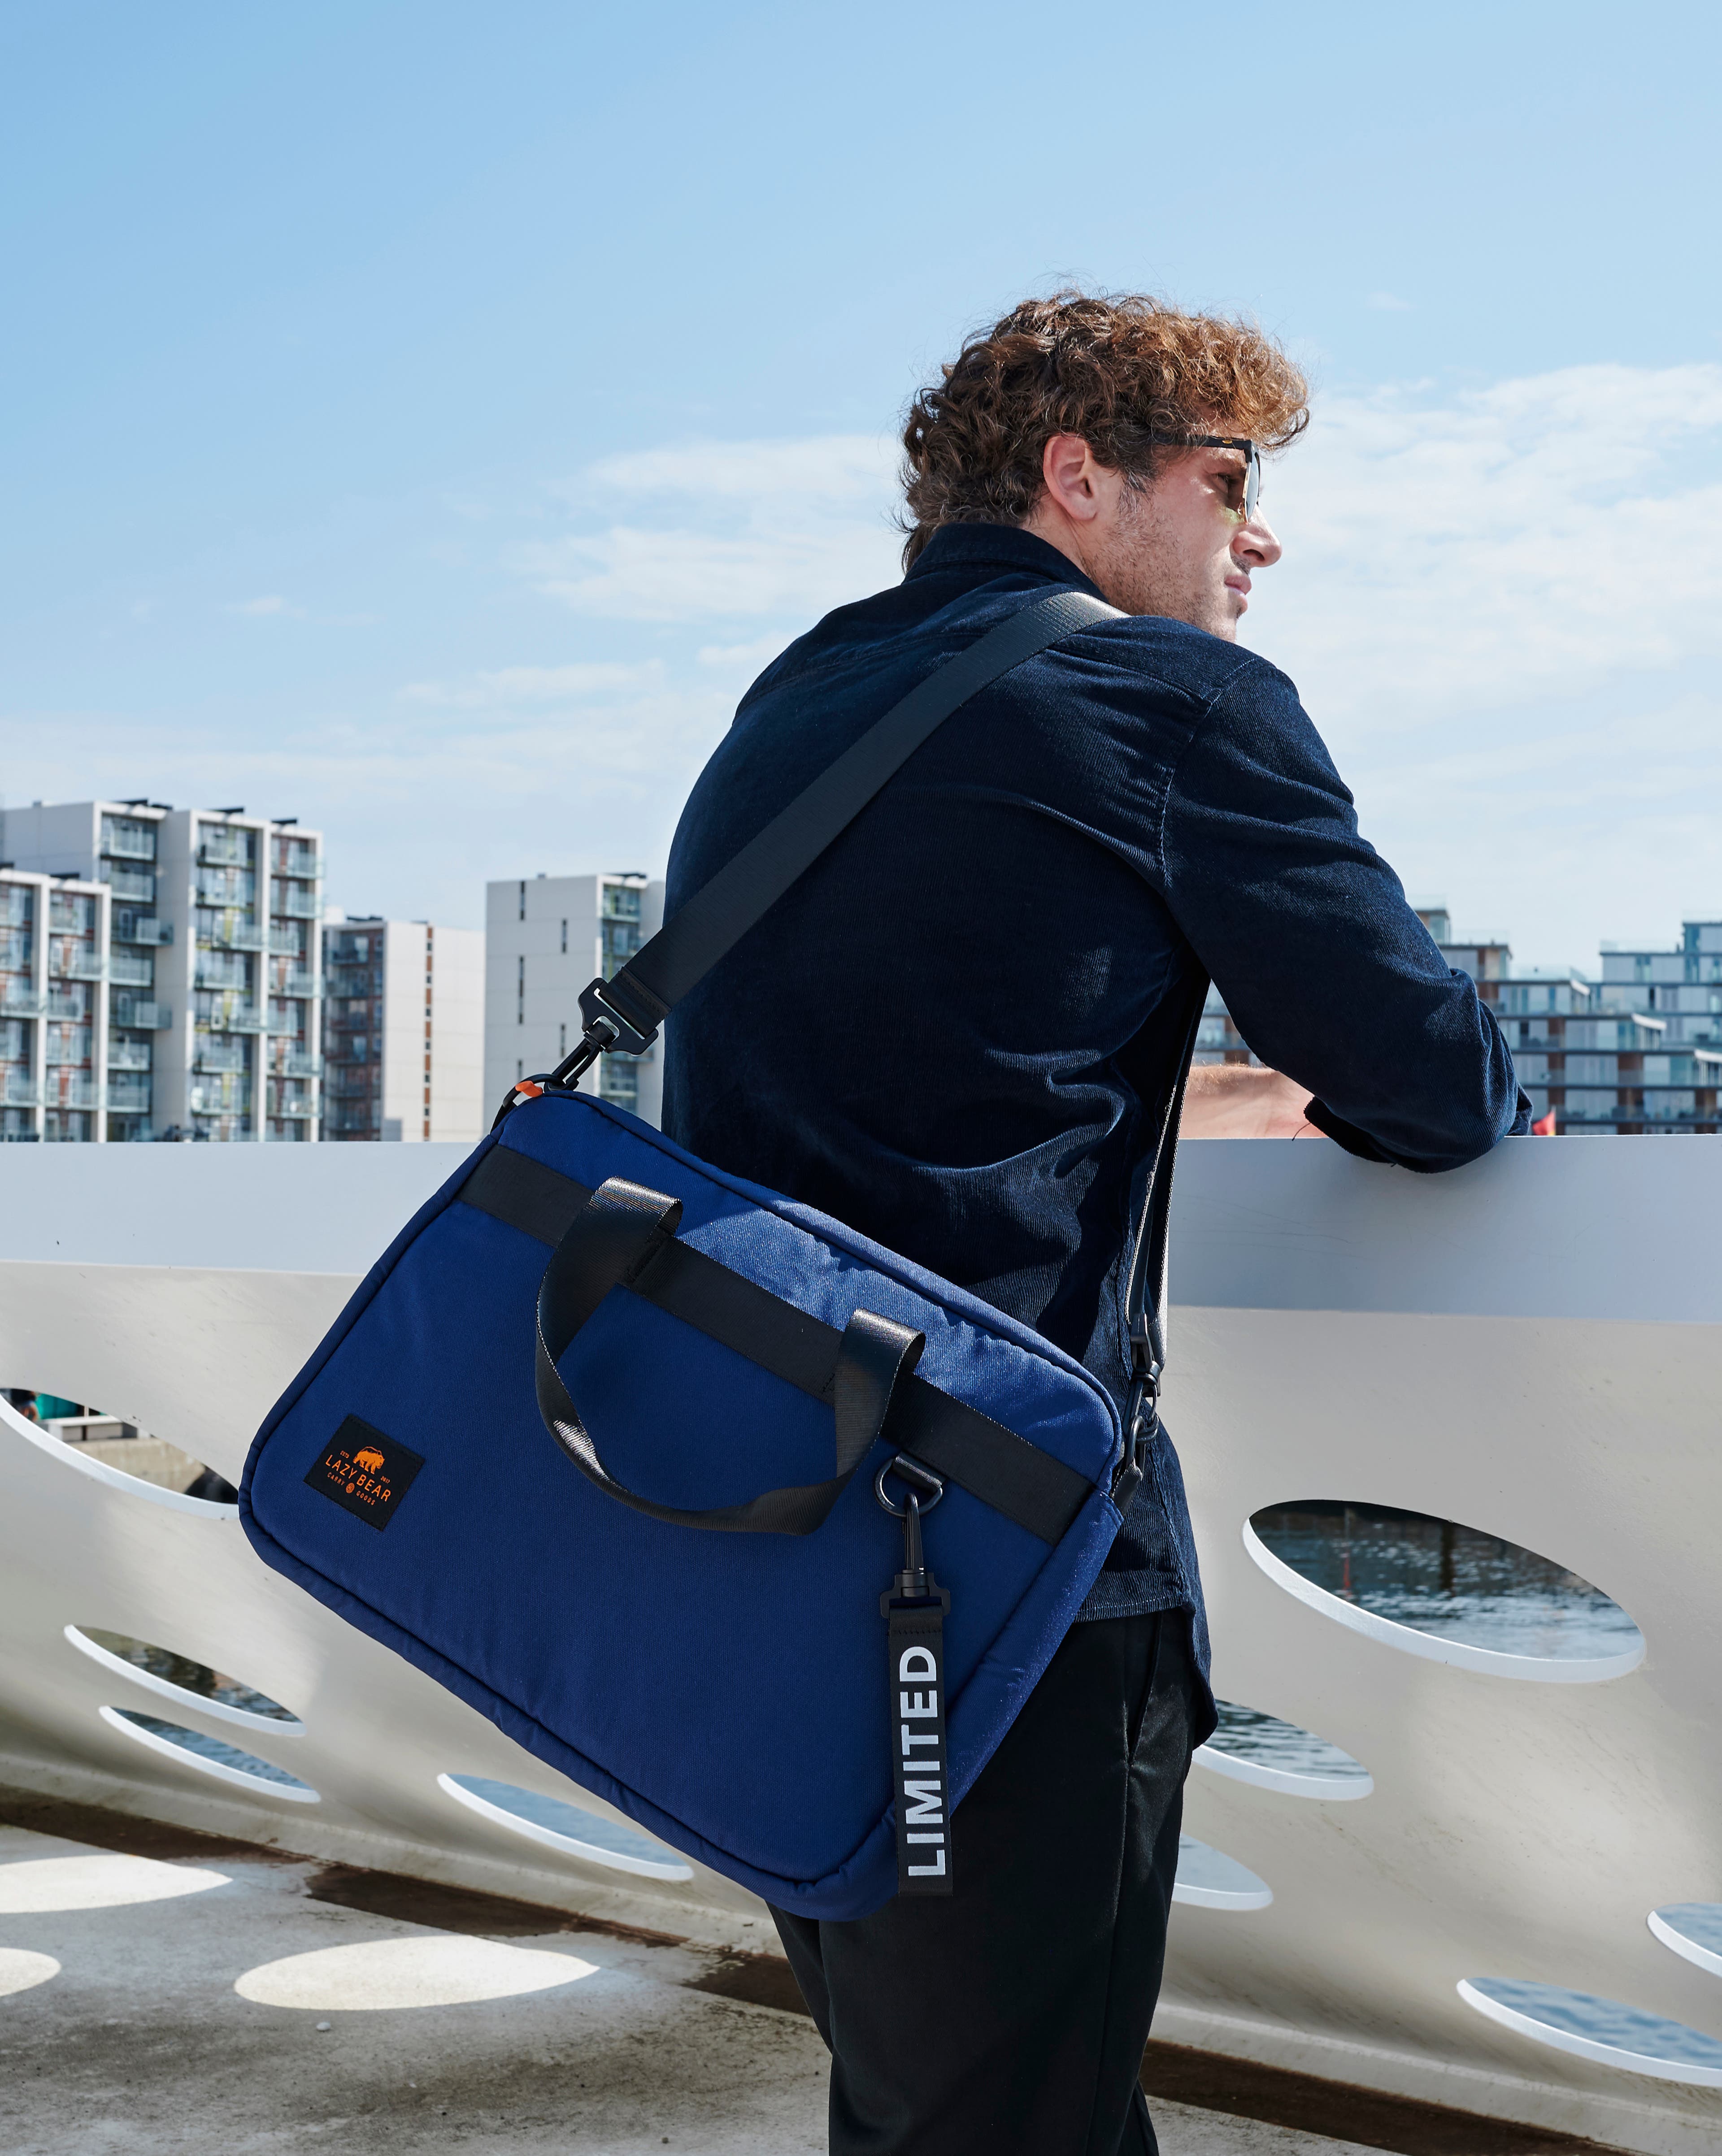 Foldable, travel-ready bags for the urban explorer